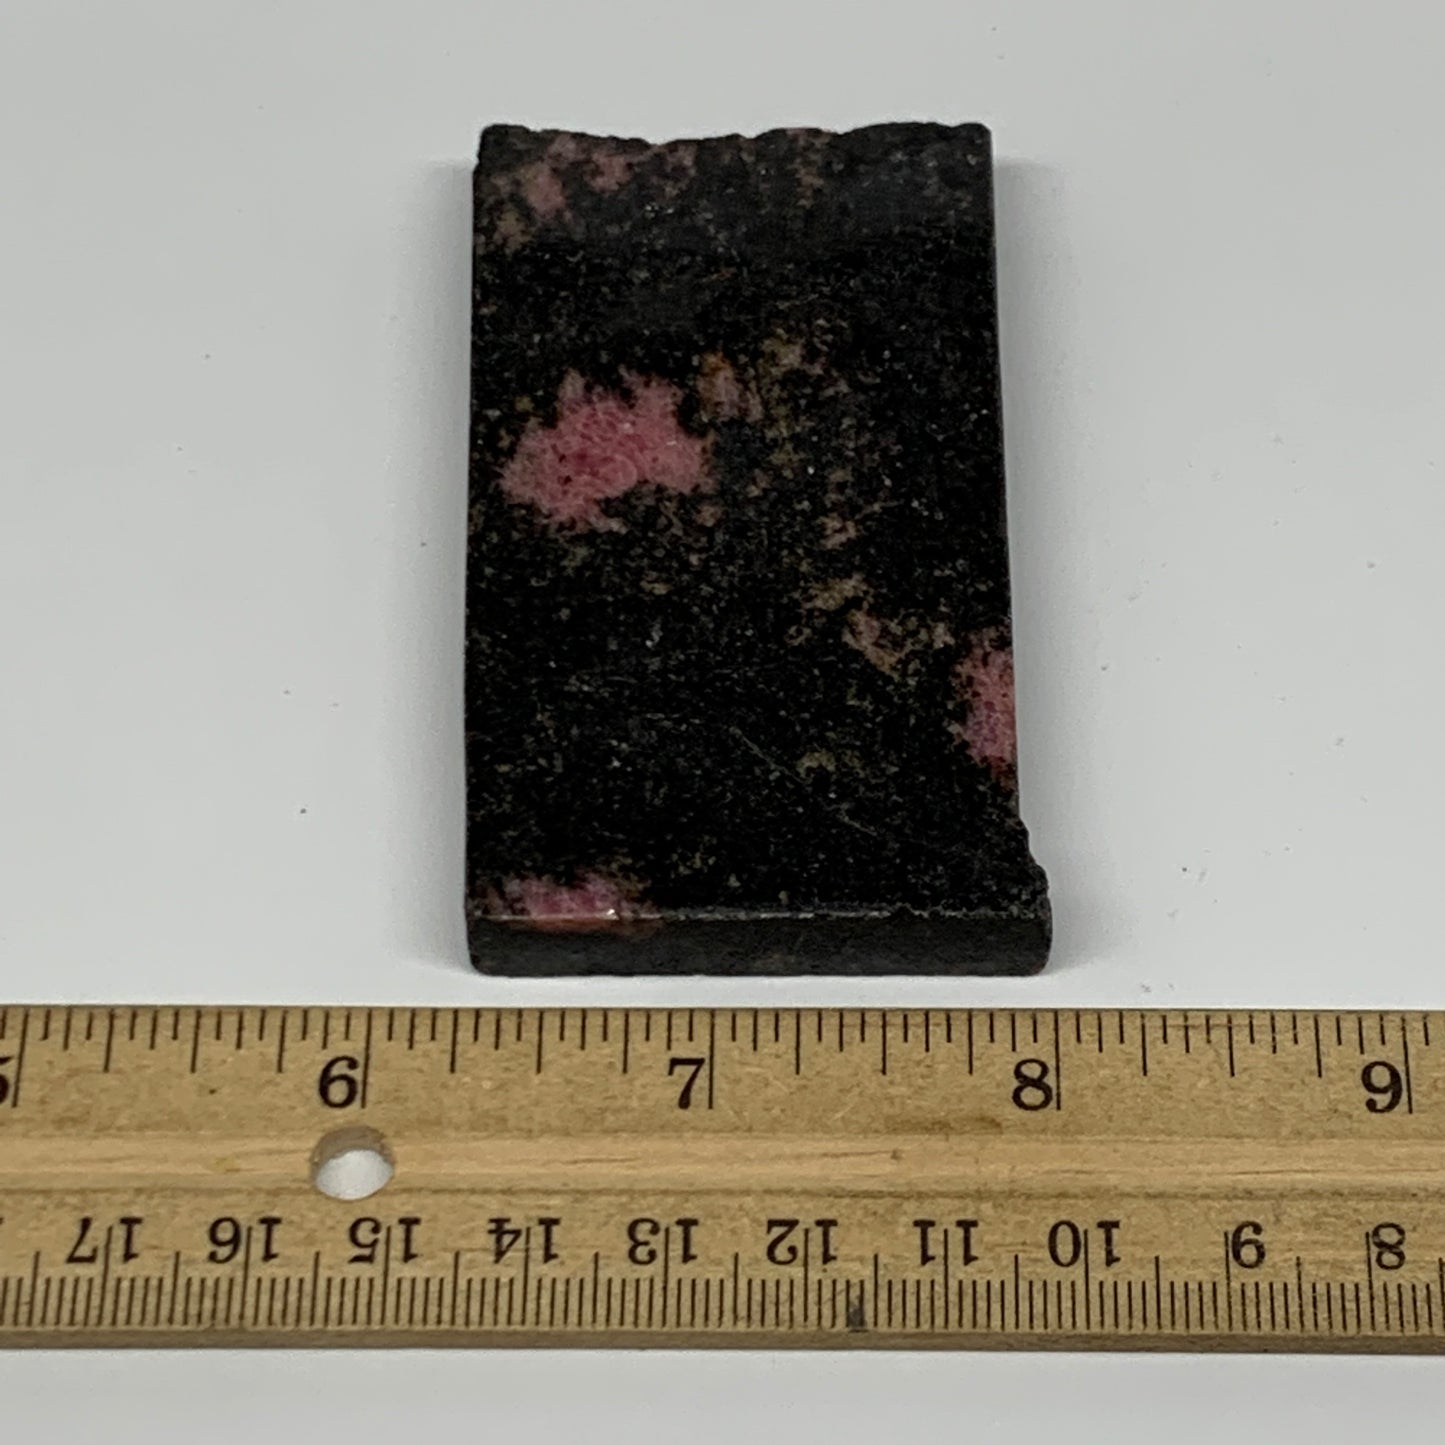 109.7g, 3"x1.7"x0.4", One face polished Rhodonite, One face semi polished, B1600